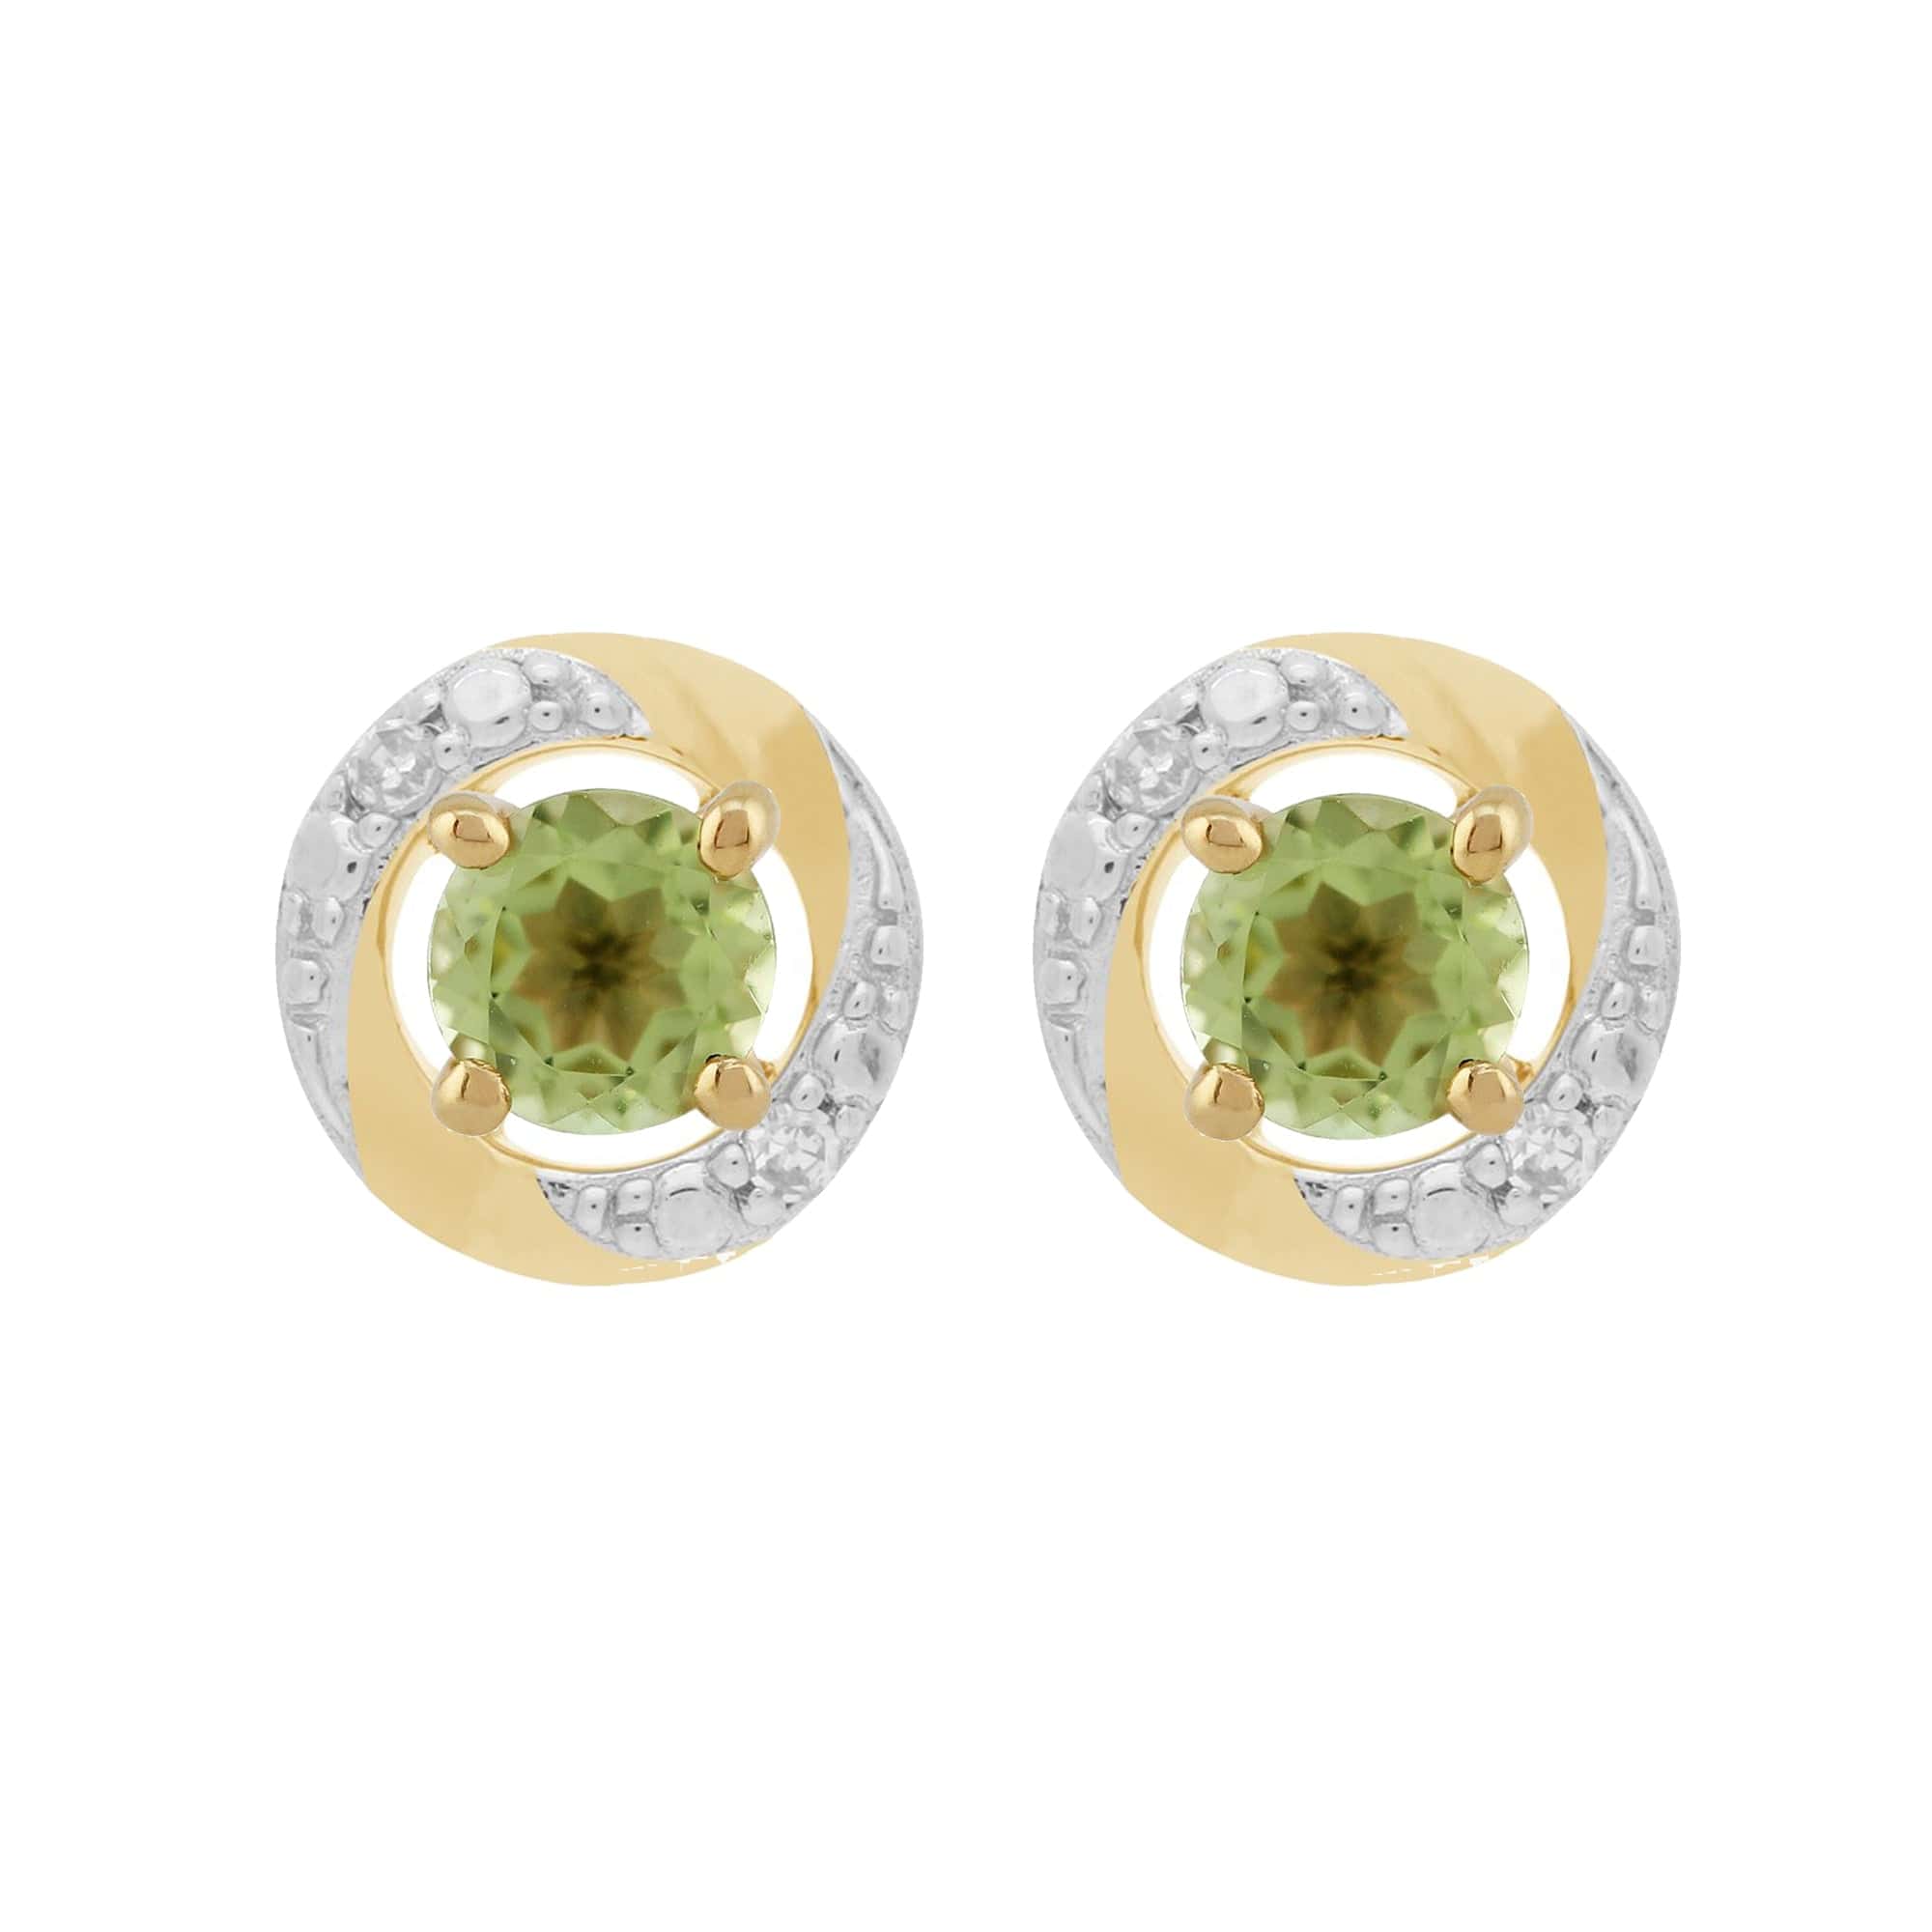 11562-191E0374019 Classic Round Peridot Stud Earrings with Detachable Diamond Halo Ear Jacket in 9ct Yellow Gold 1